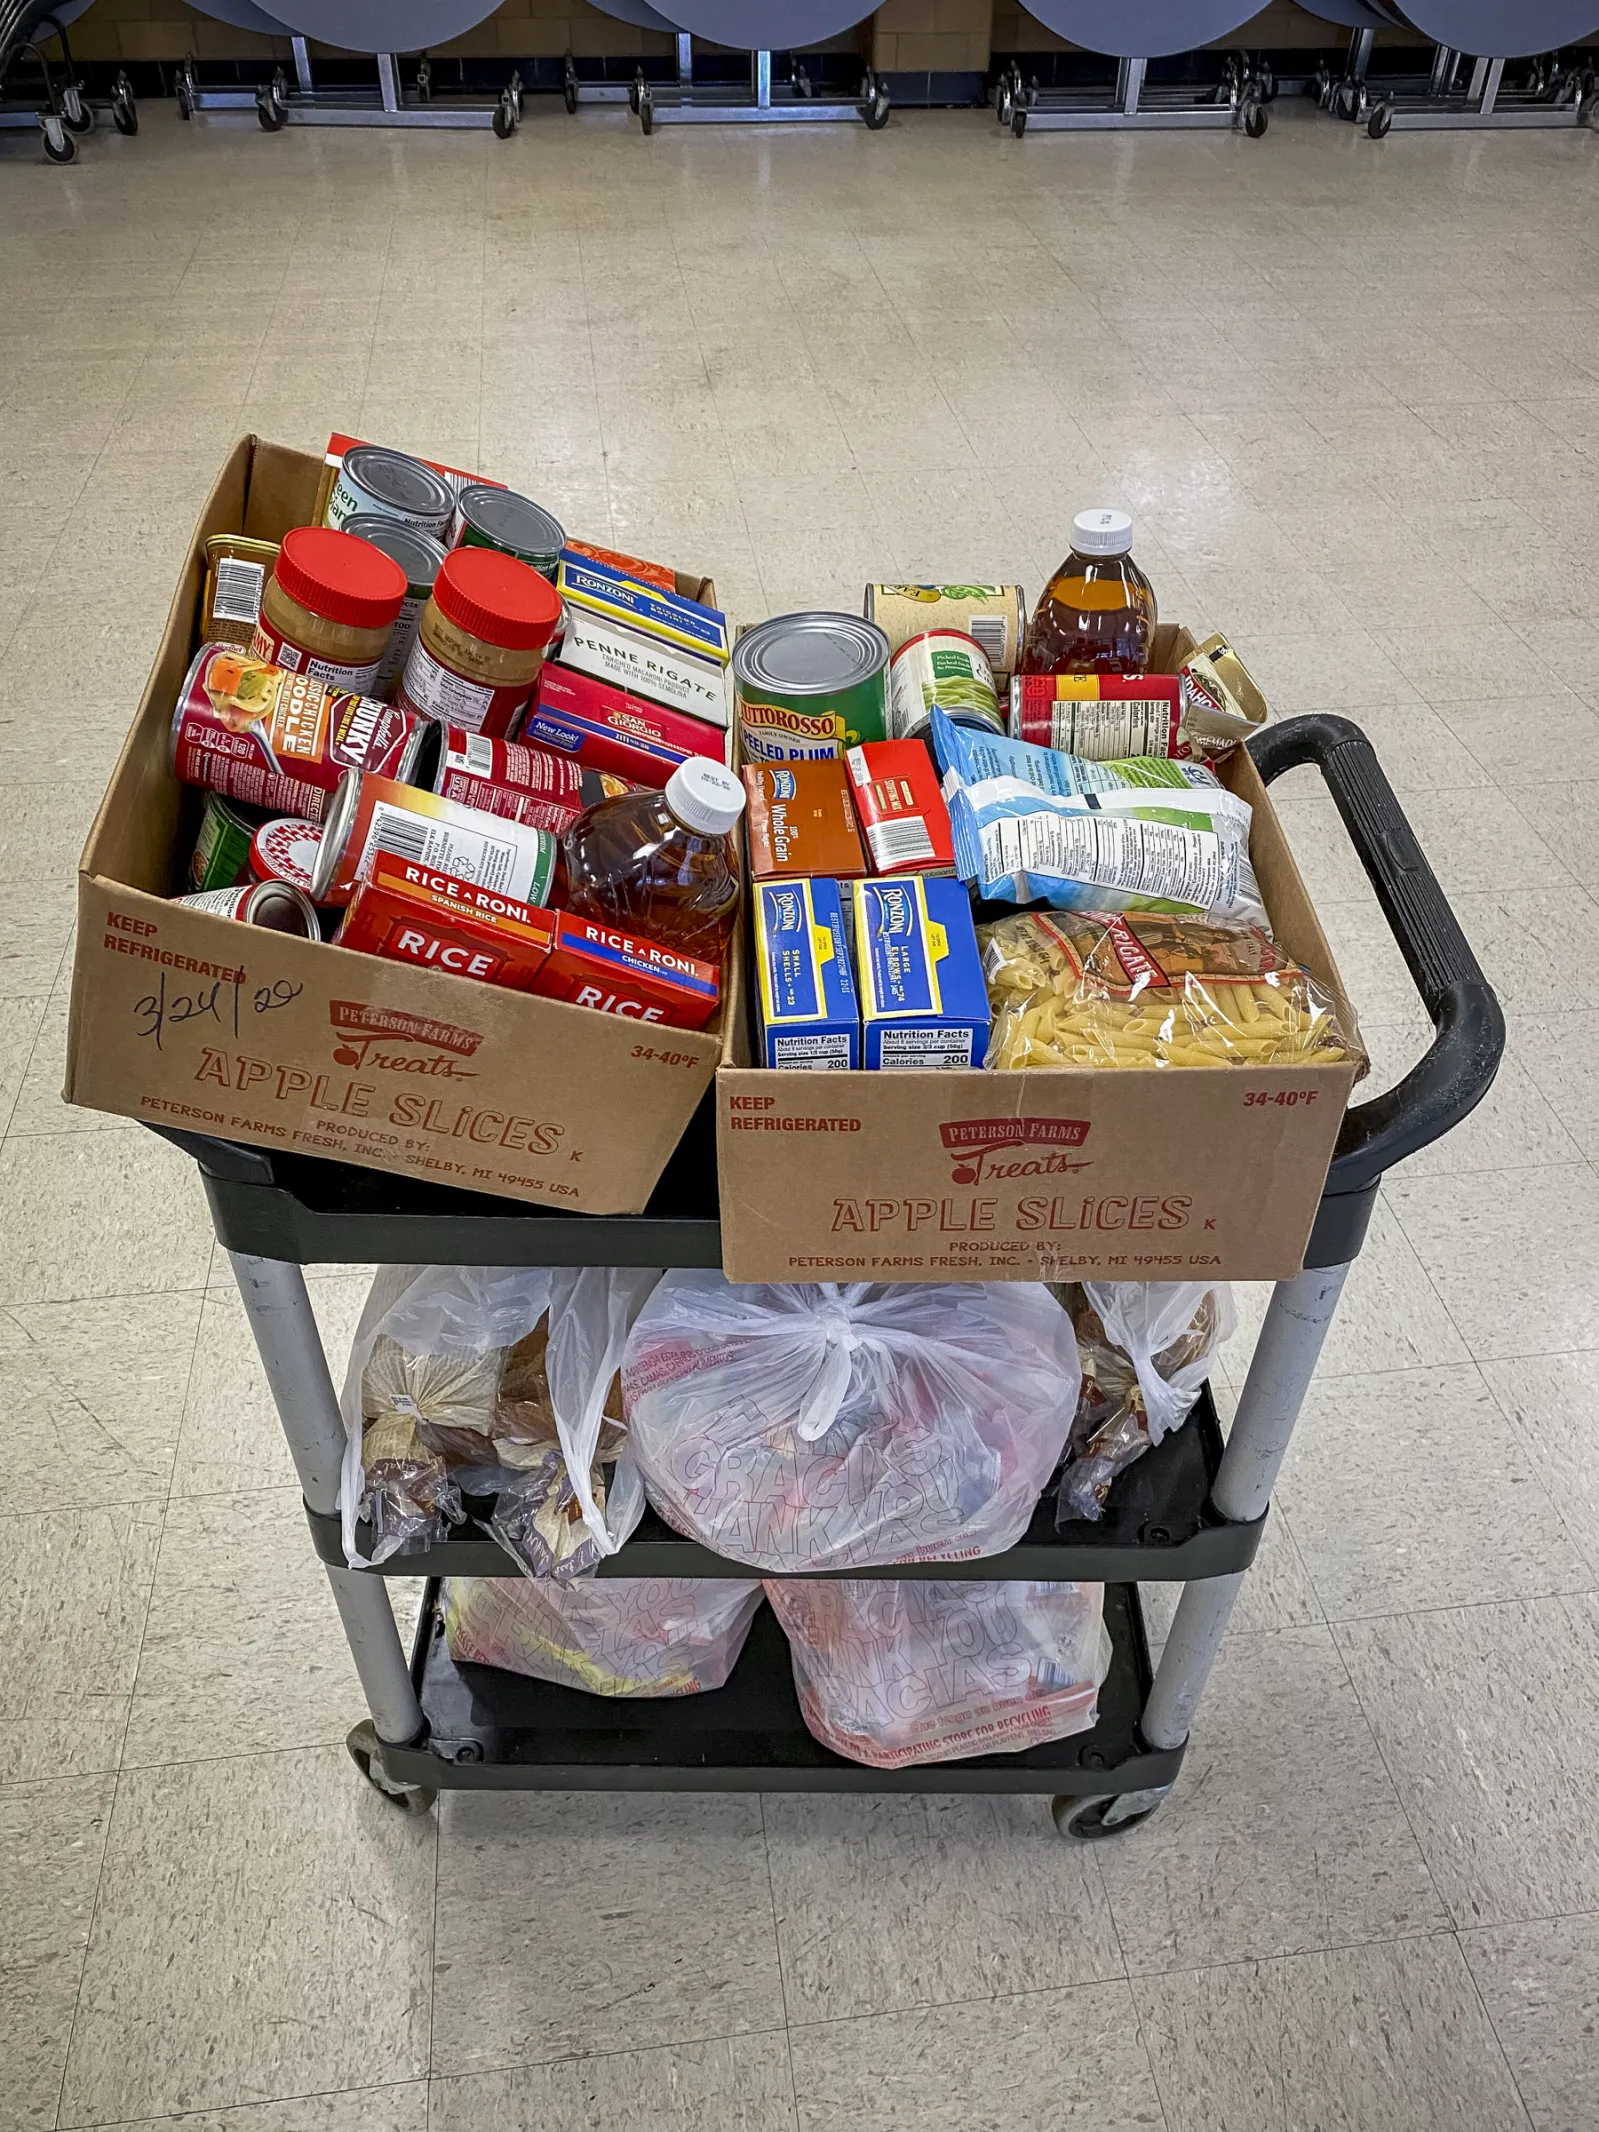 A cart is stocked with boxes of canned goods, dry pasta, juice and more for families in need.